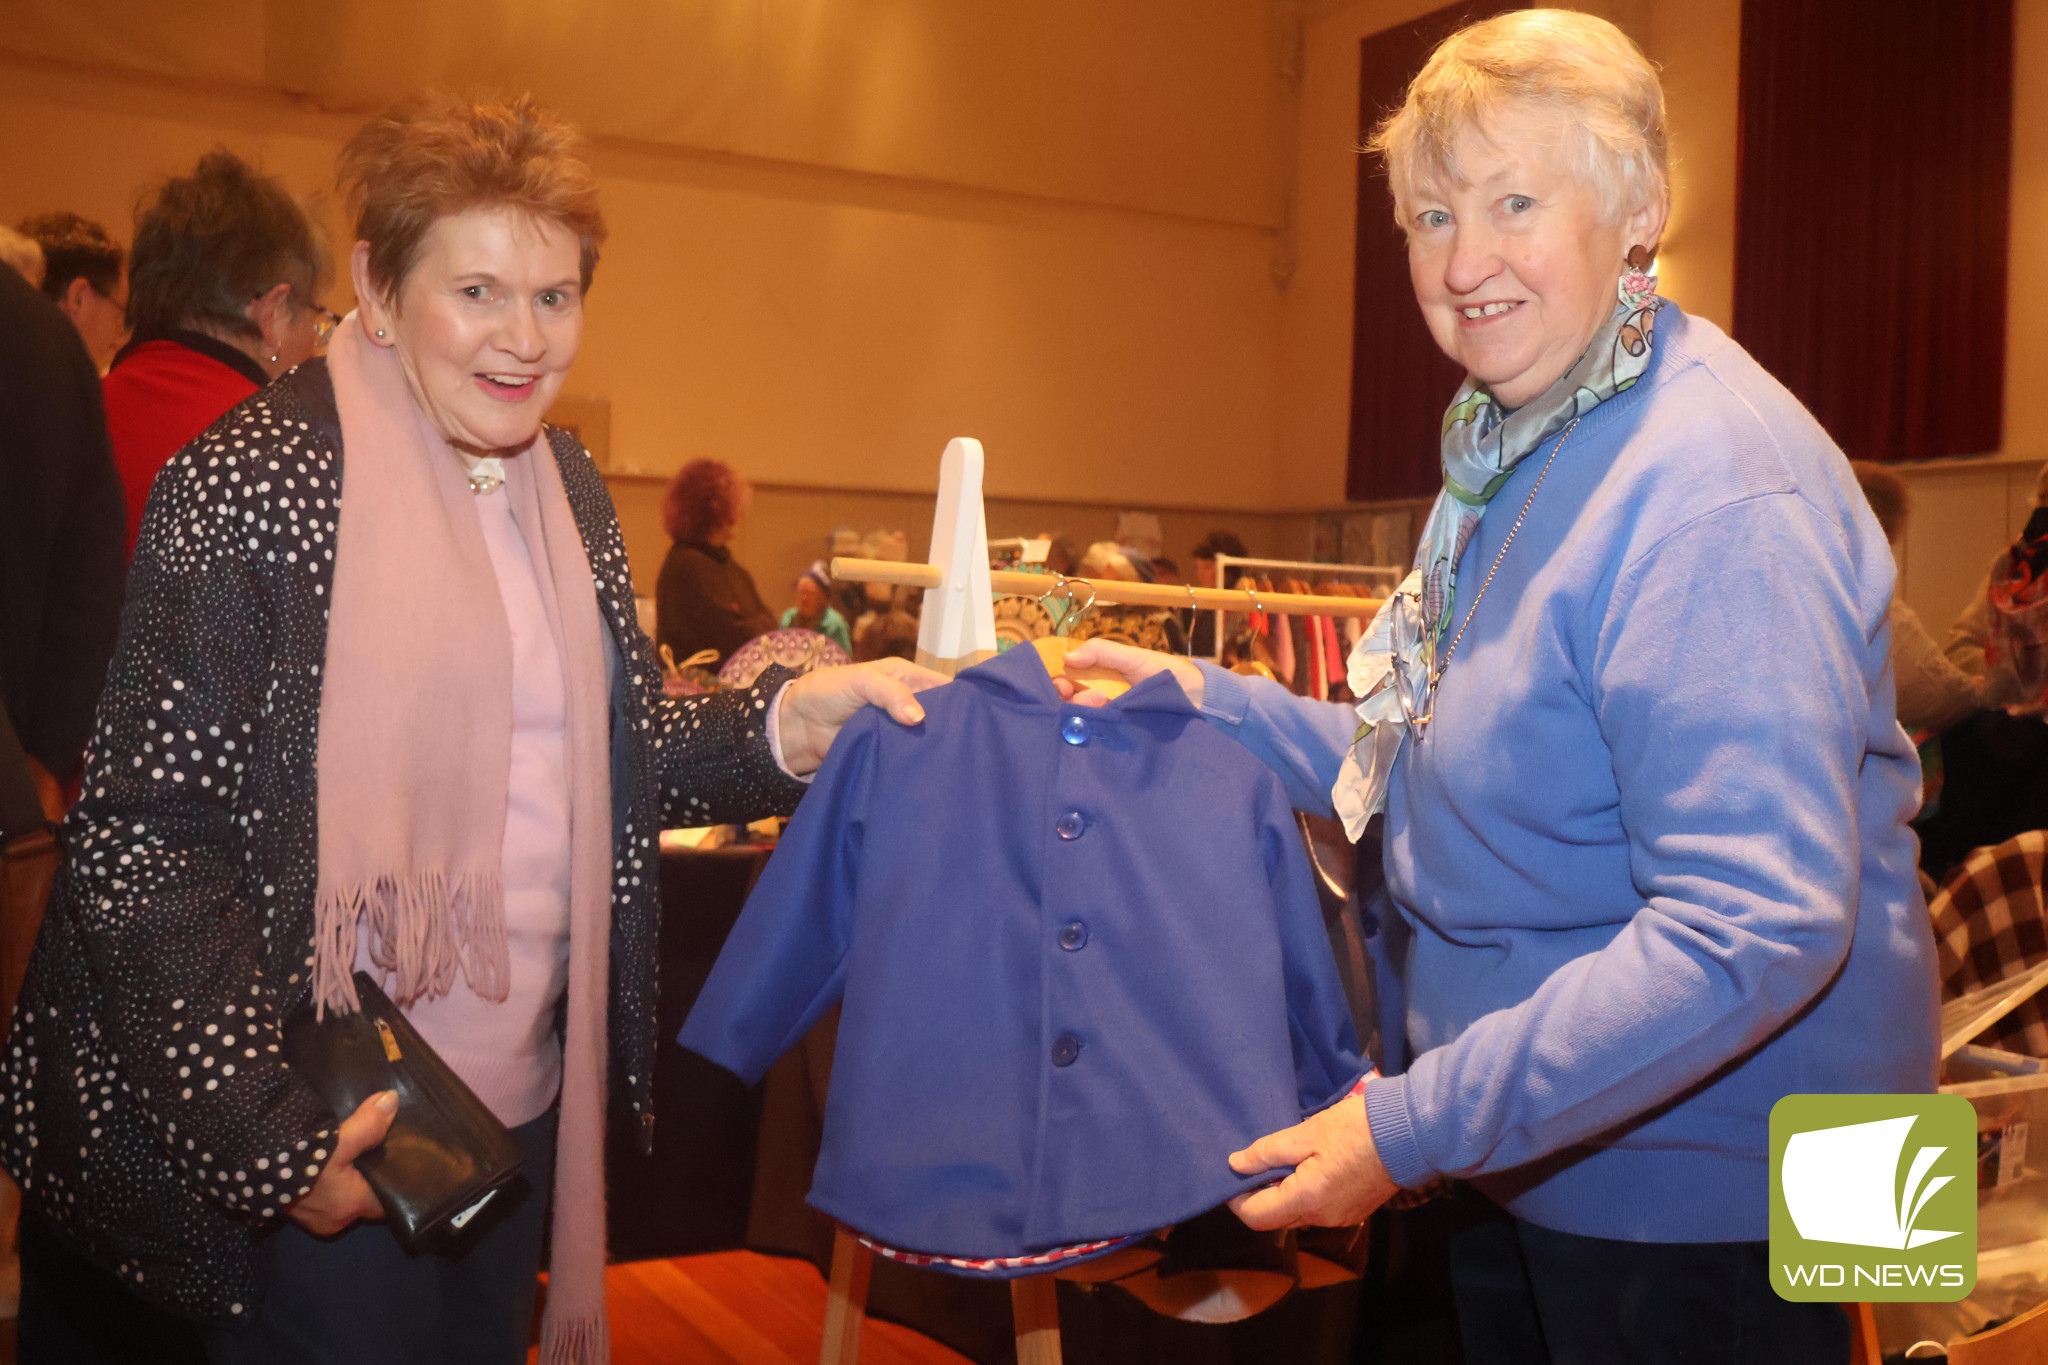 Markets a hit: Terang’s Bernadette McKinnon (left) was among those snatching up local goods at the first Terang Makers Market held over the weekend. She is pictured with event organiser Anne Gready, who was blown away with the success of the day.